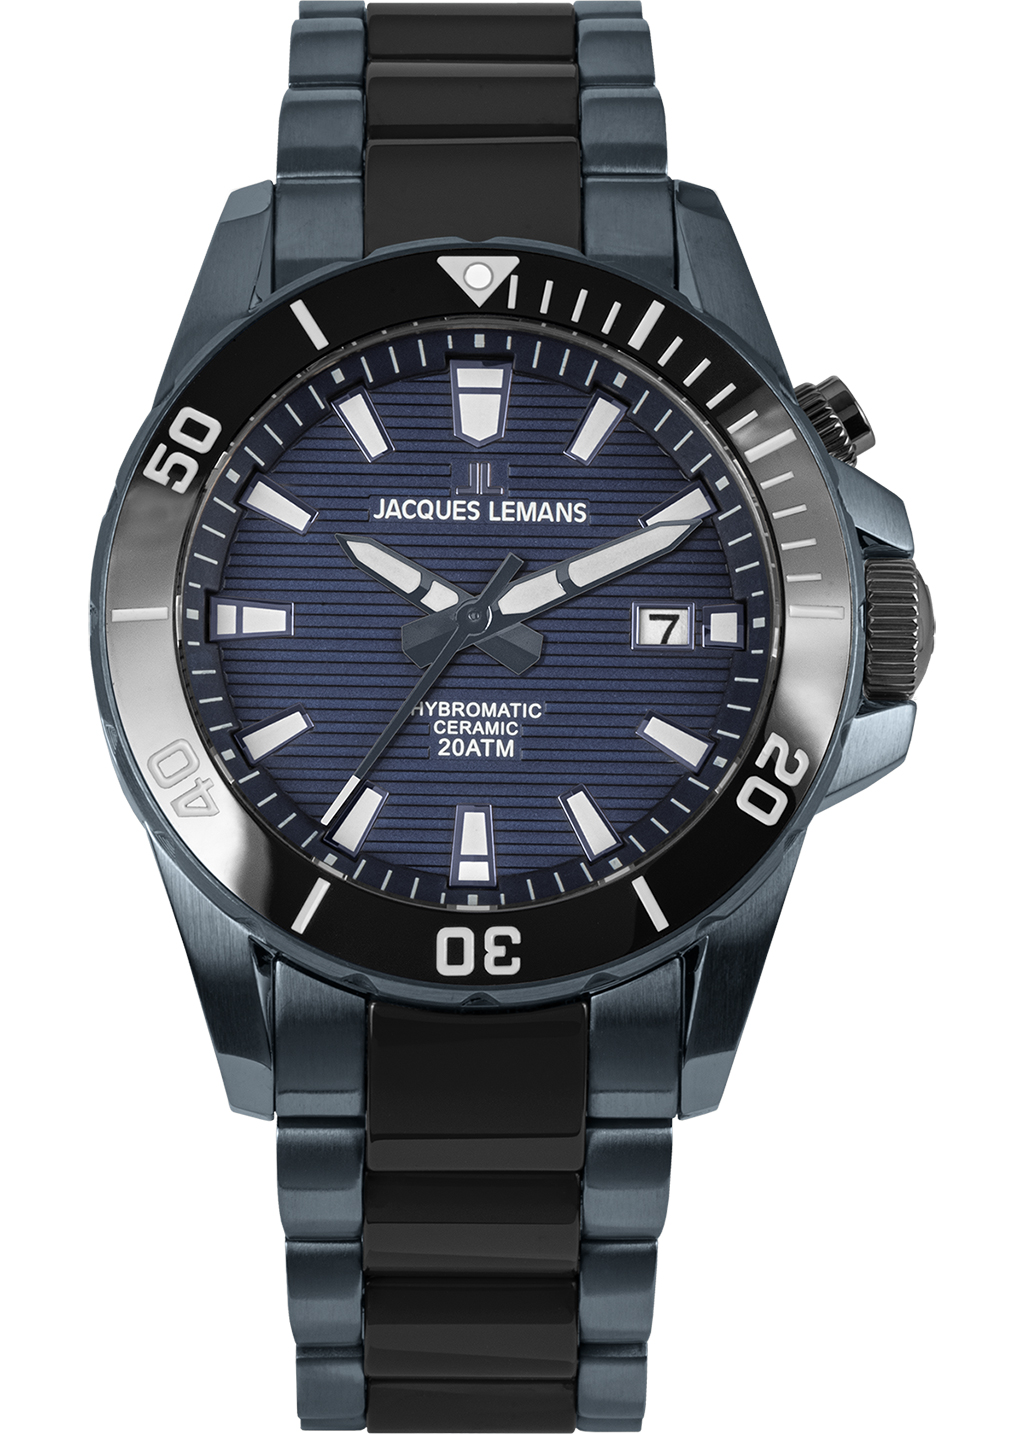 JACQUES LEMANS HYBROMATIC LIMITED EDITION lifestyle